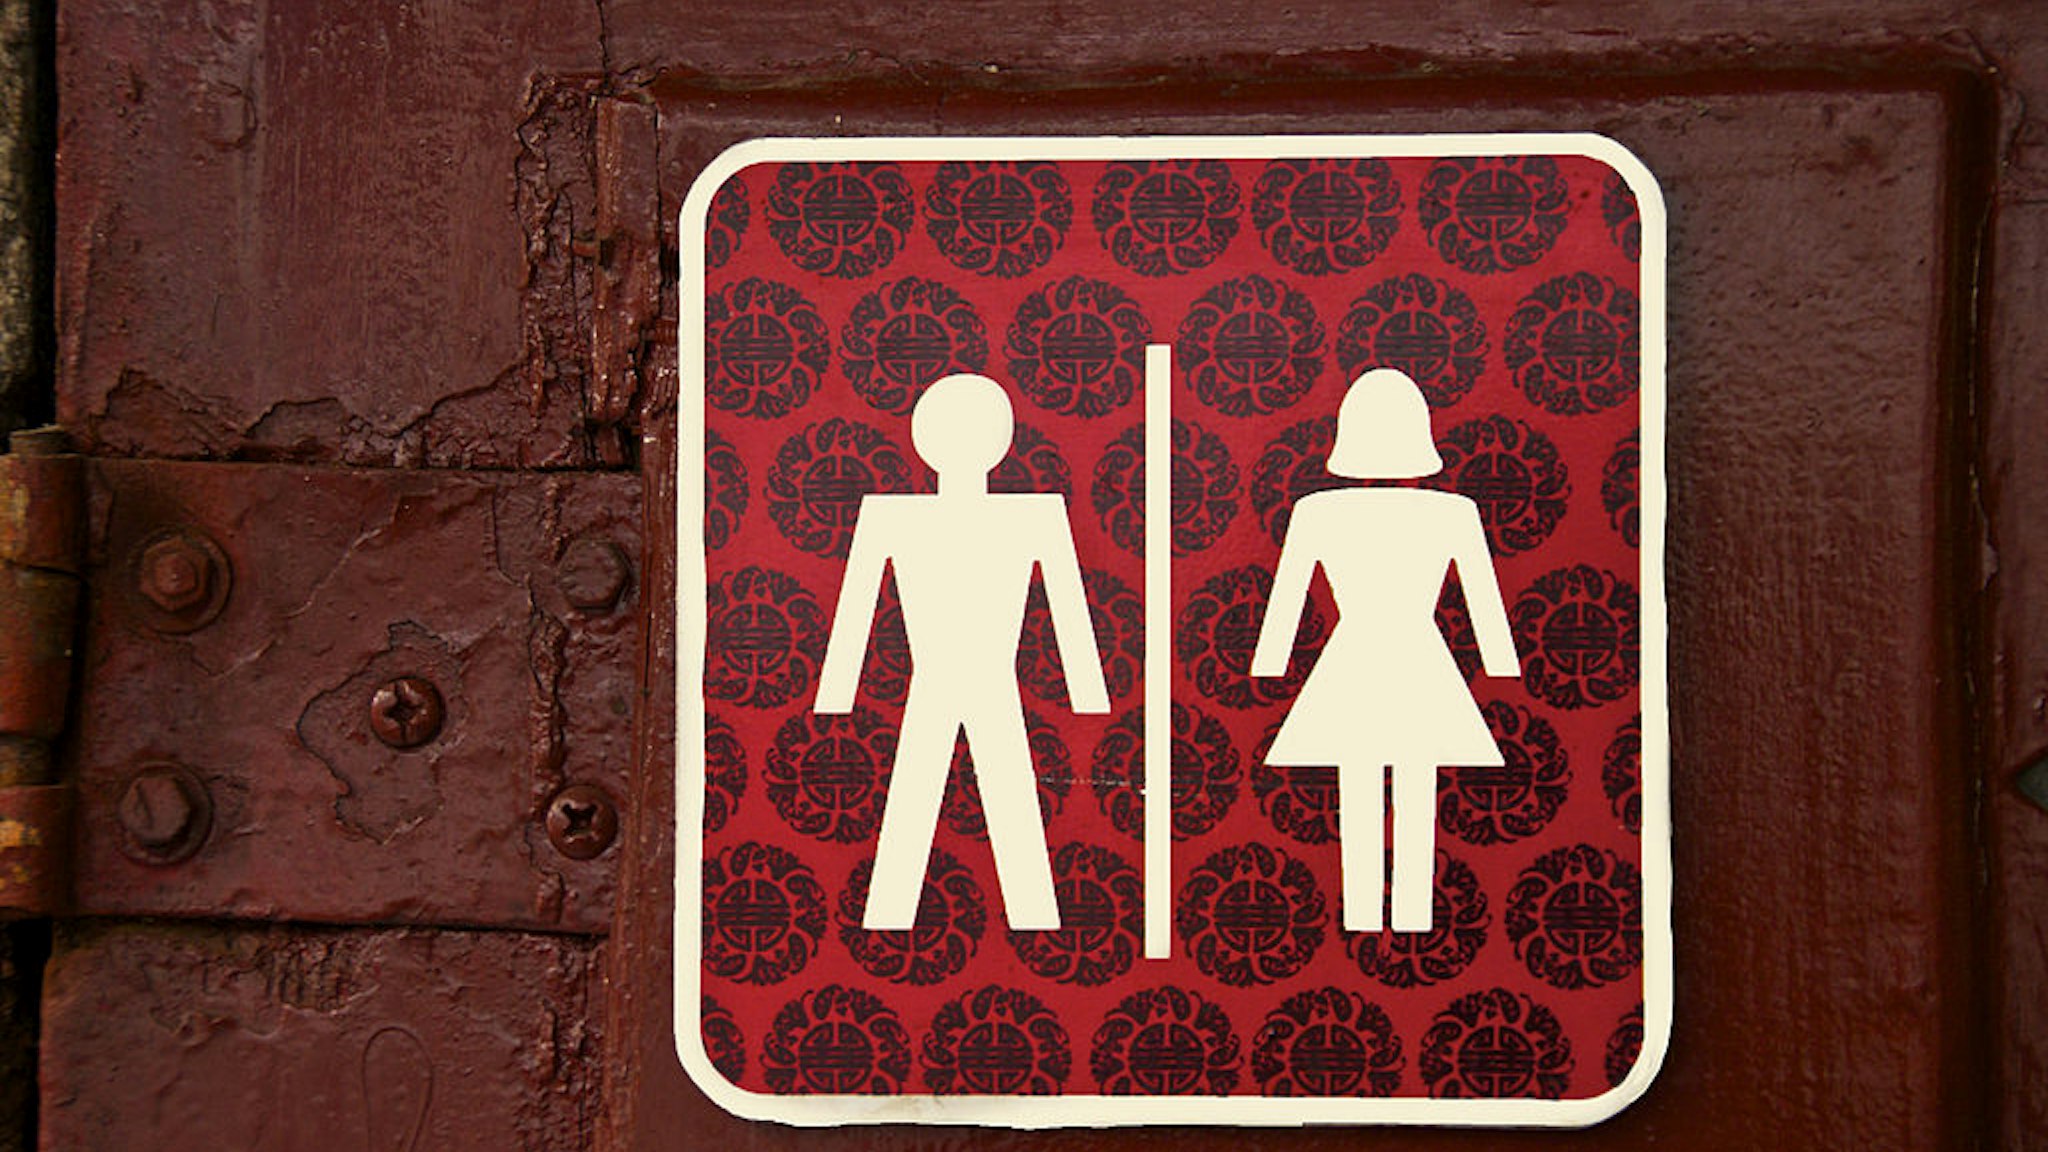 Restroom. (Photo by: BSIP/Universal Images Group via Getty Images)